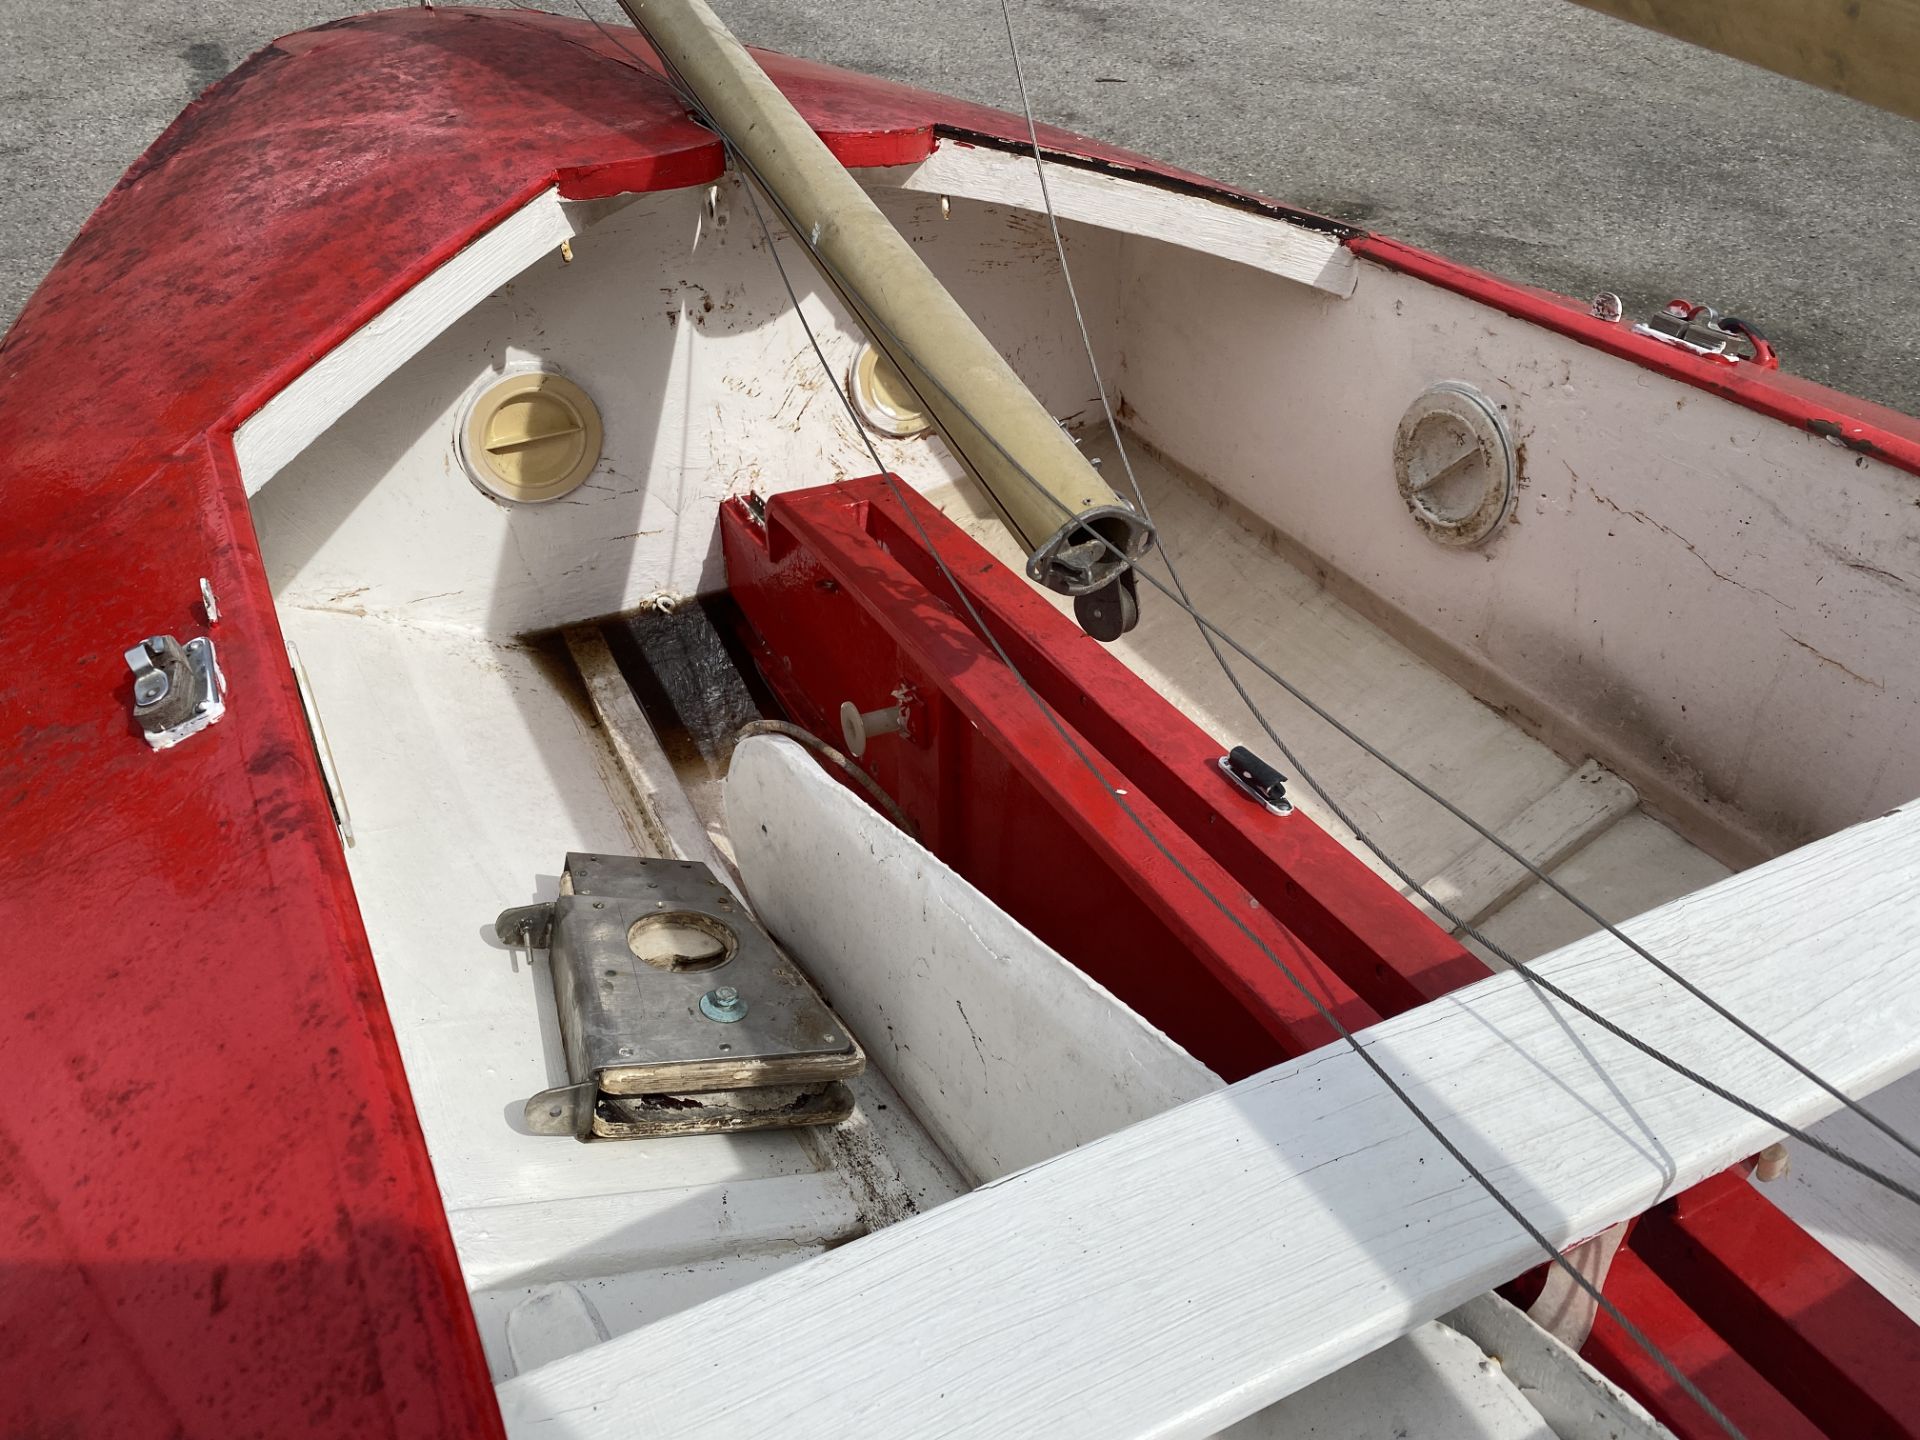 Red and white Fireball sailing boat with a 9' 9" (297cm) mast. - Image 7 of 24